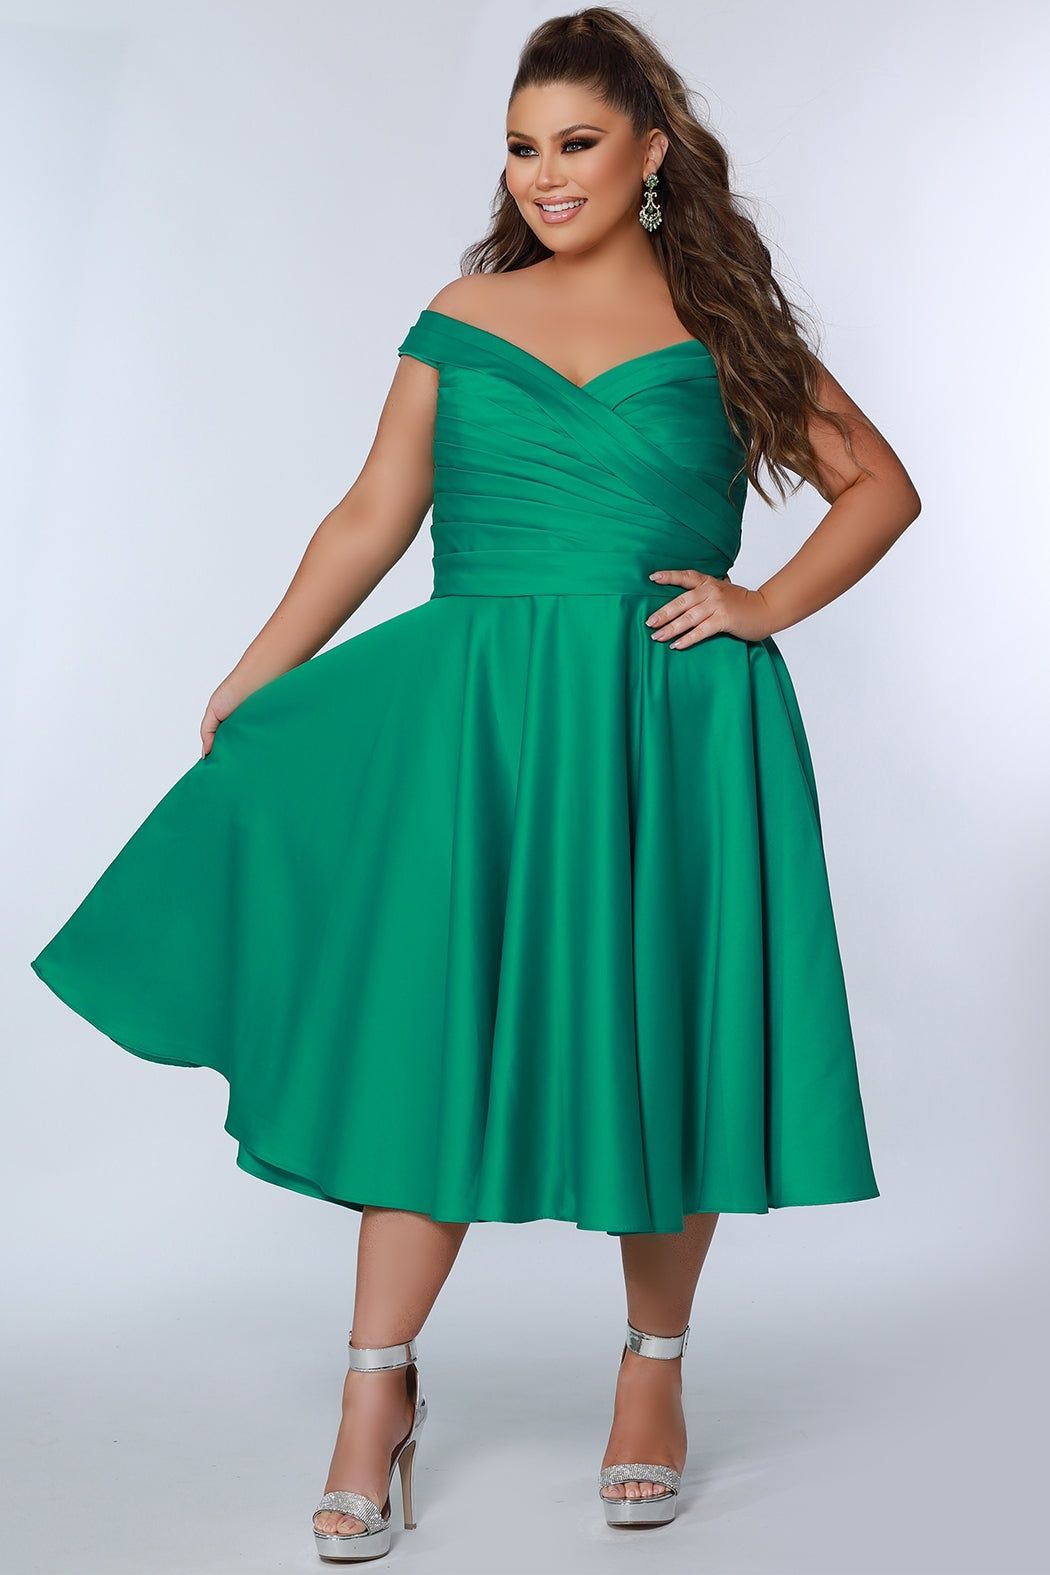 Style CE2301 Sydney's Closet Plus Size 30 Satin Emerald Green Cocktail Dress on Queenly